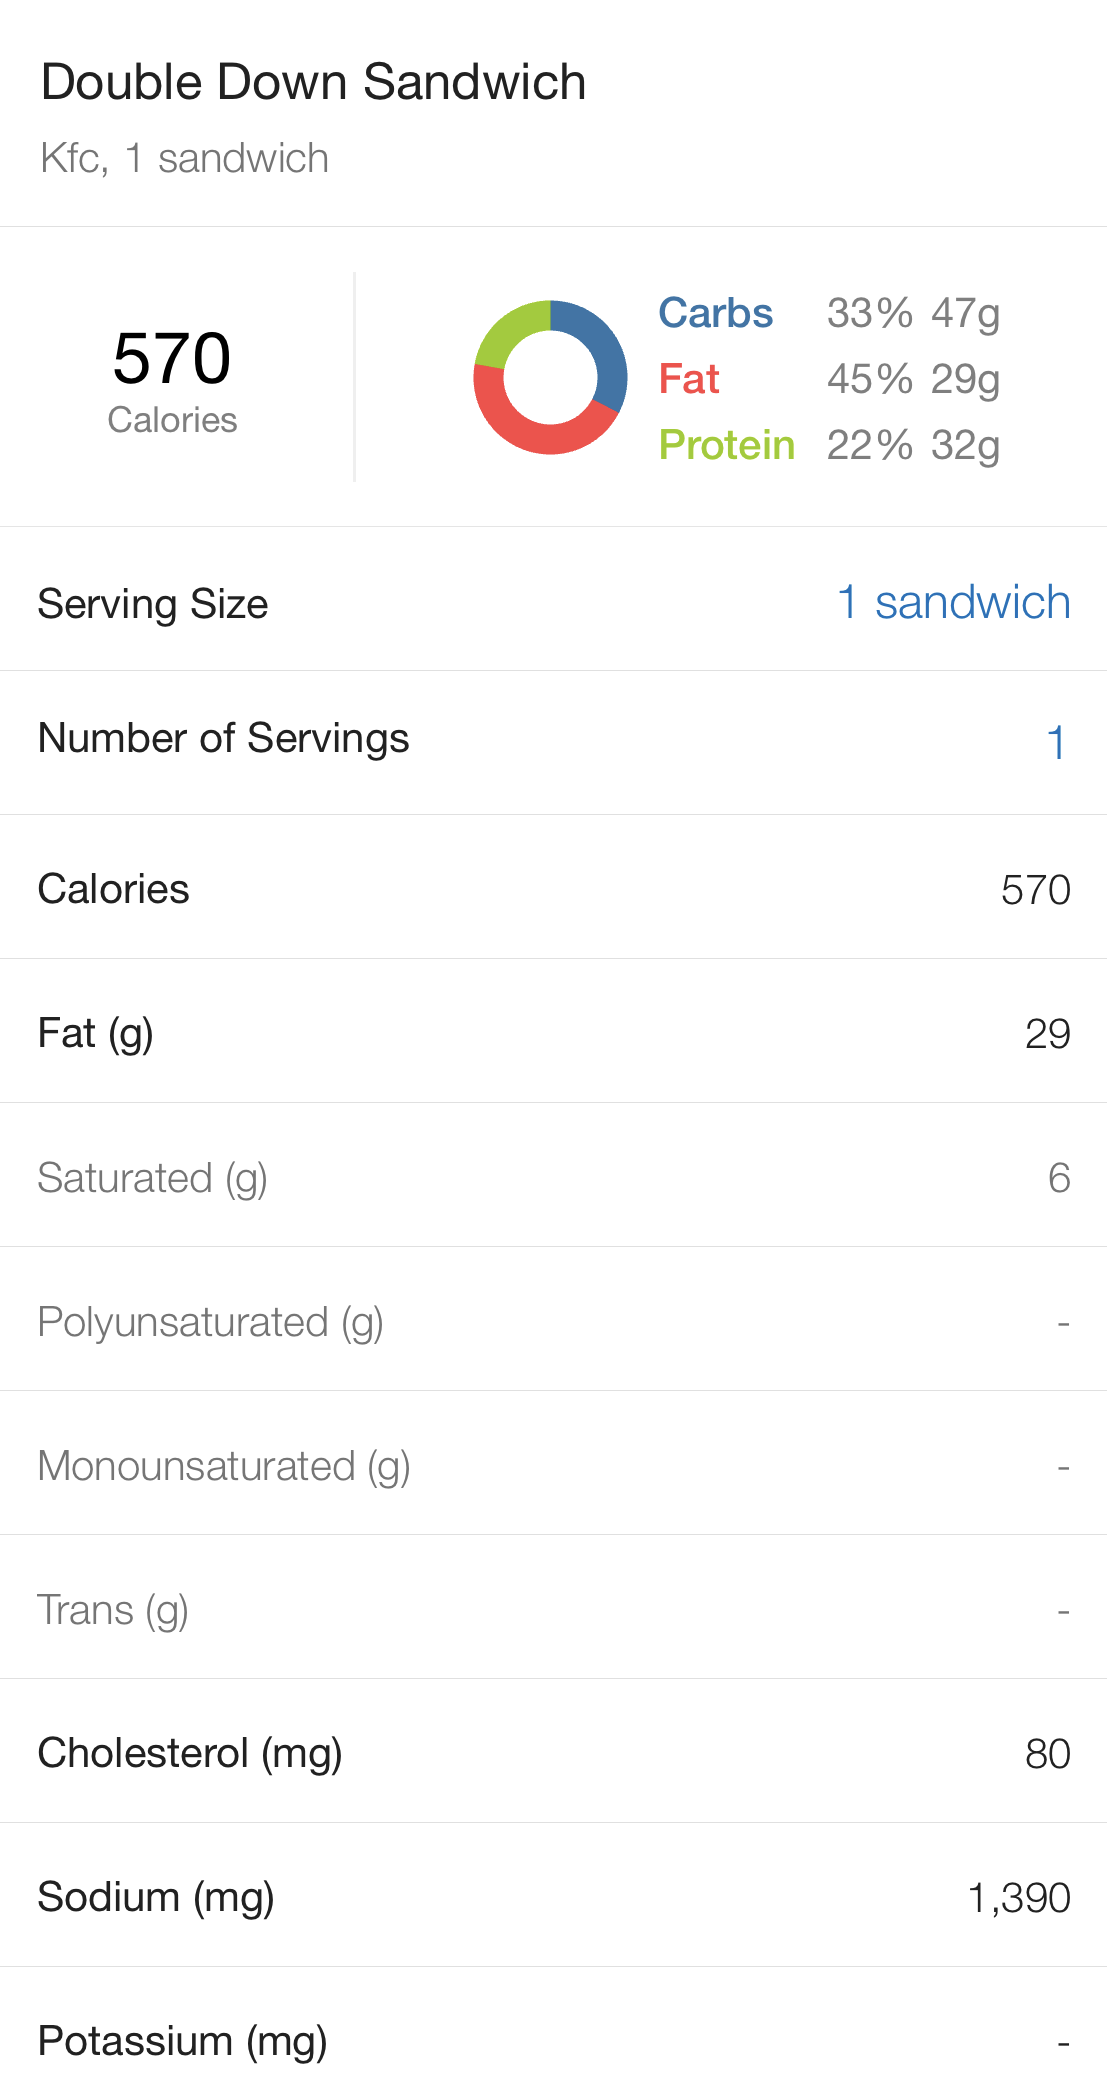 The KFC Double Down comes in at 570 calories according to MyFitnessPal